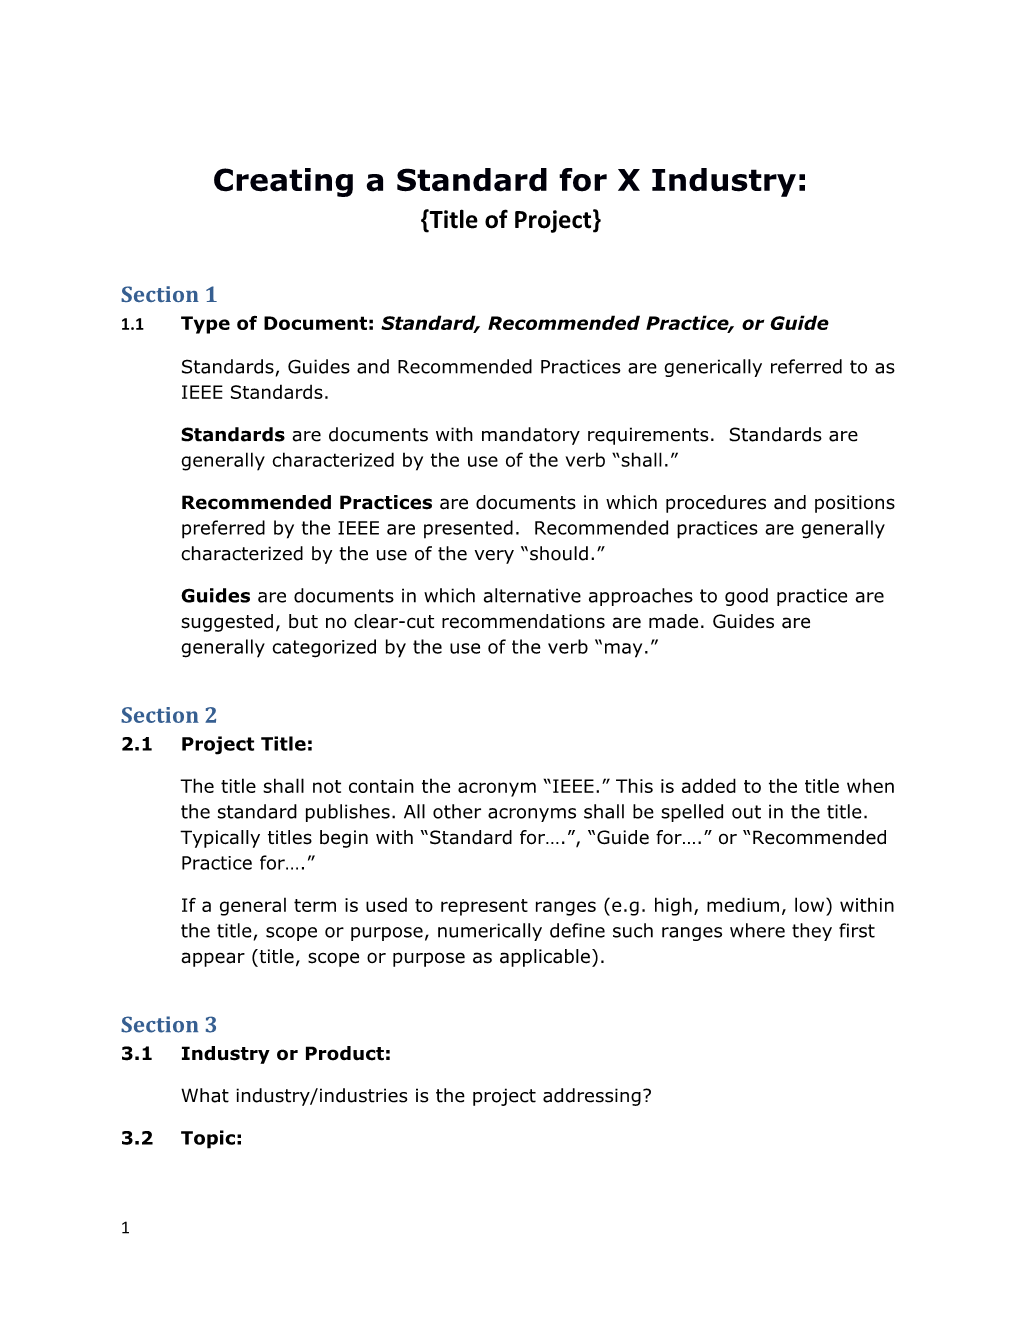 Creating a Standard for X Industry